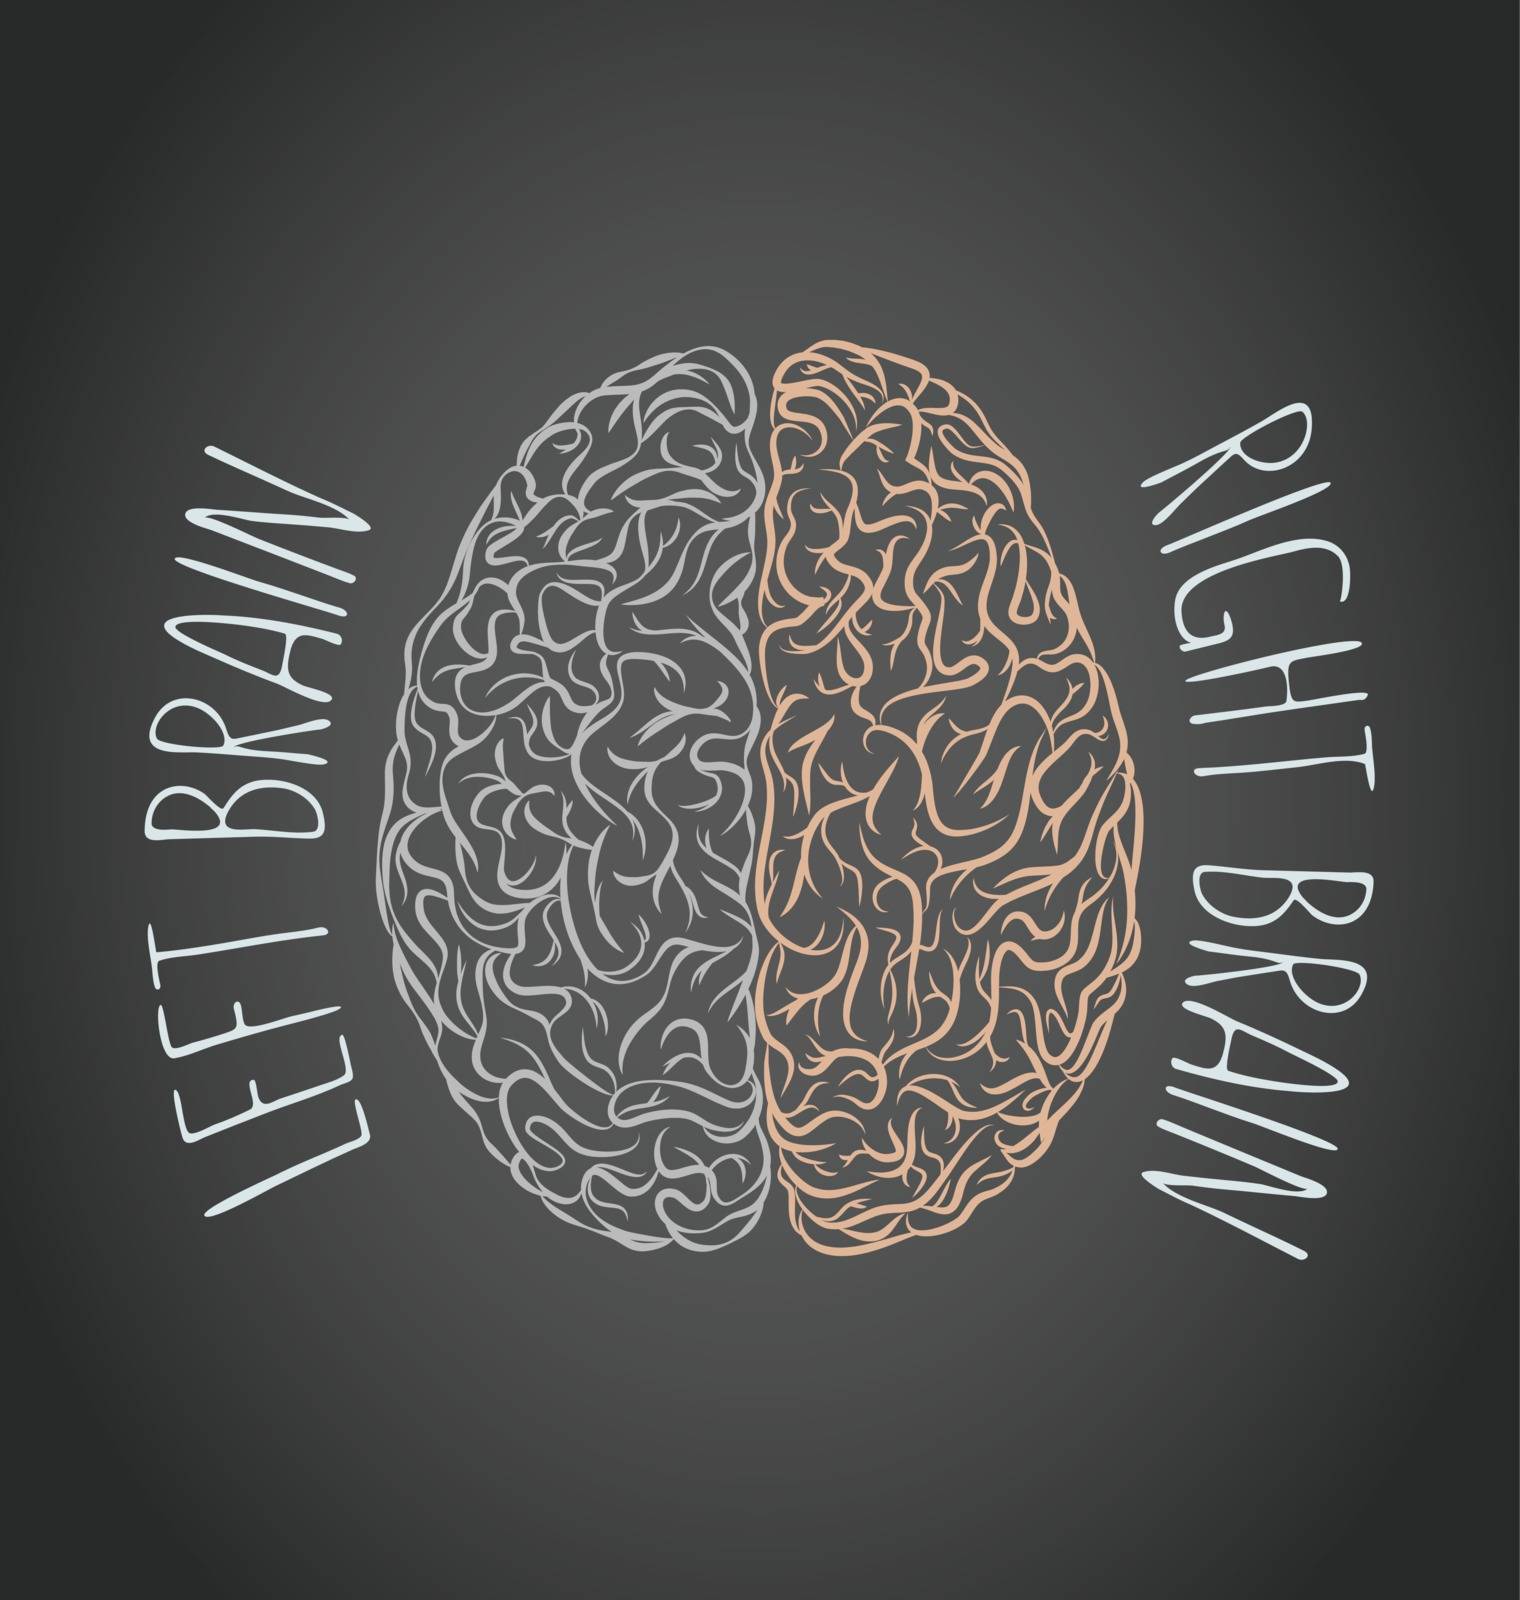 Brain left and right by Portokalis